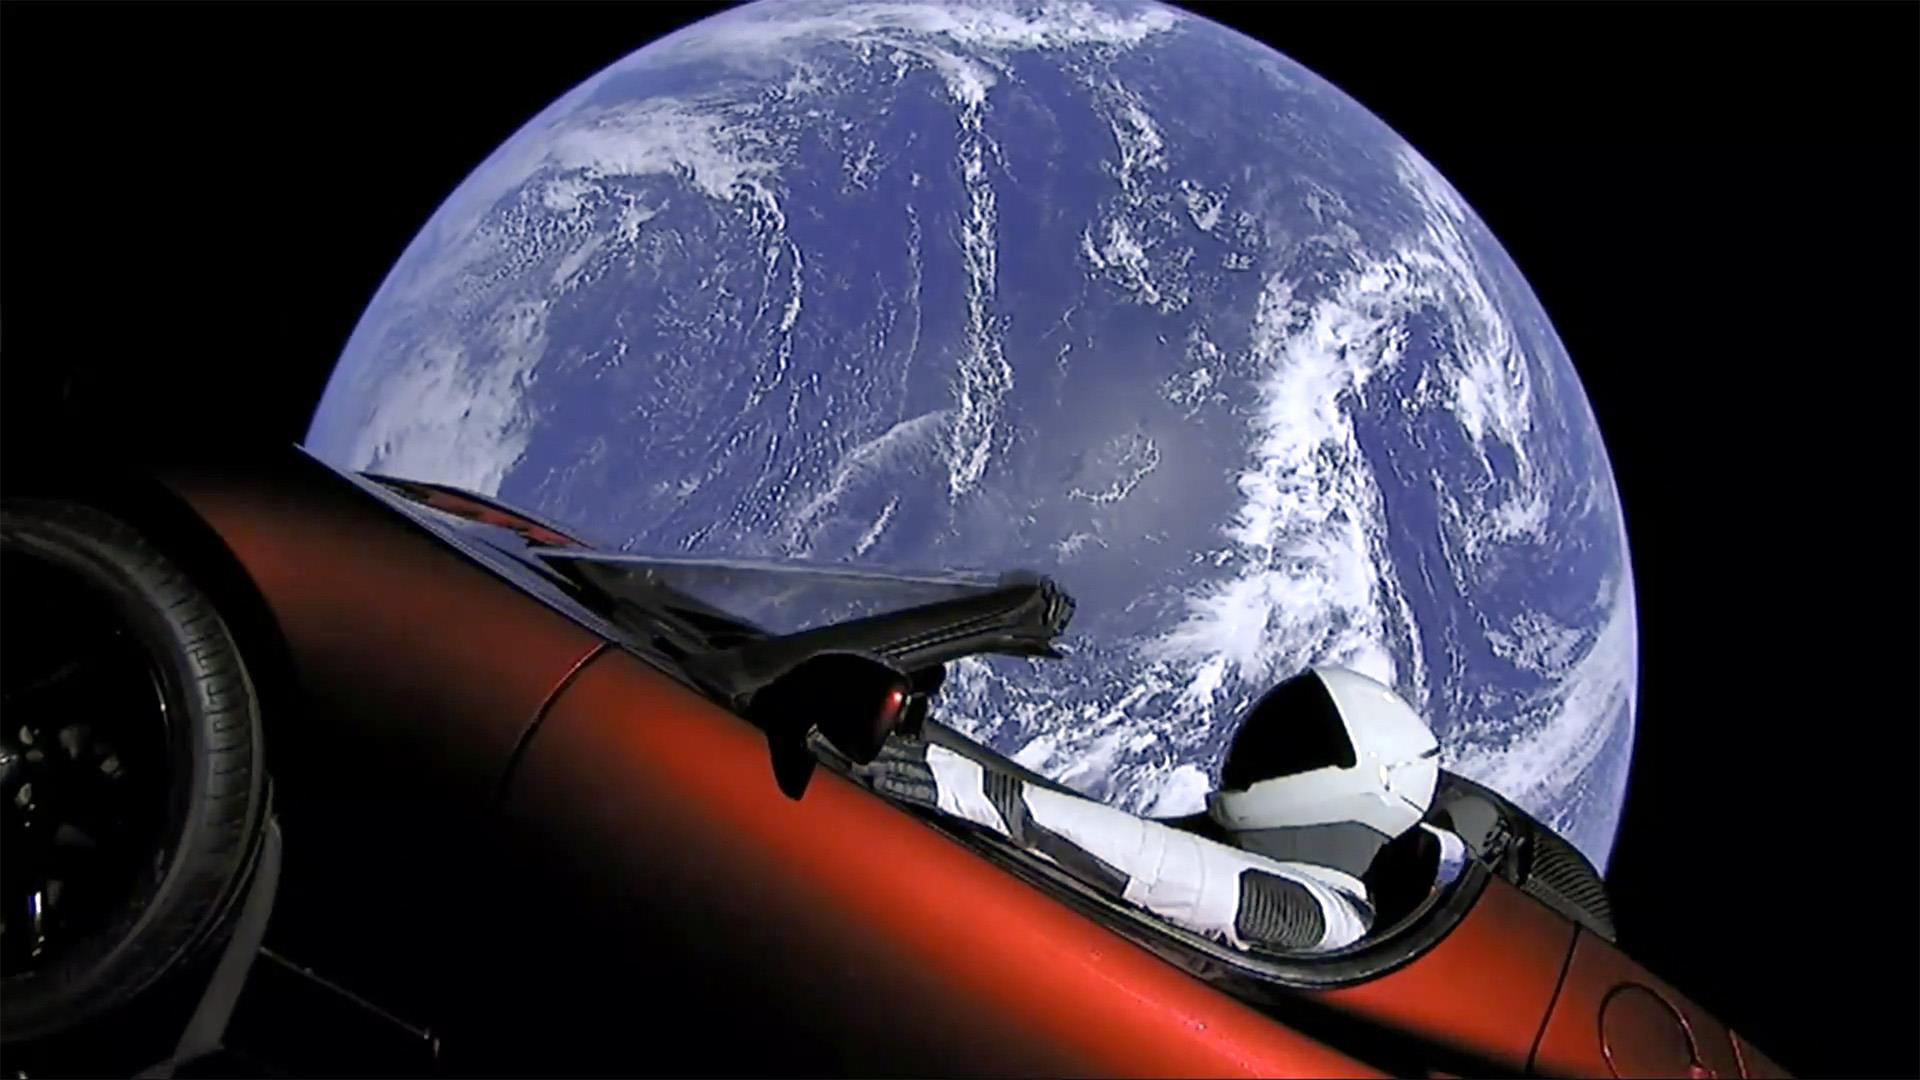 SpaceX launches Tesla into space, first car to orbit the sun